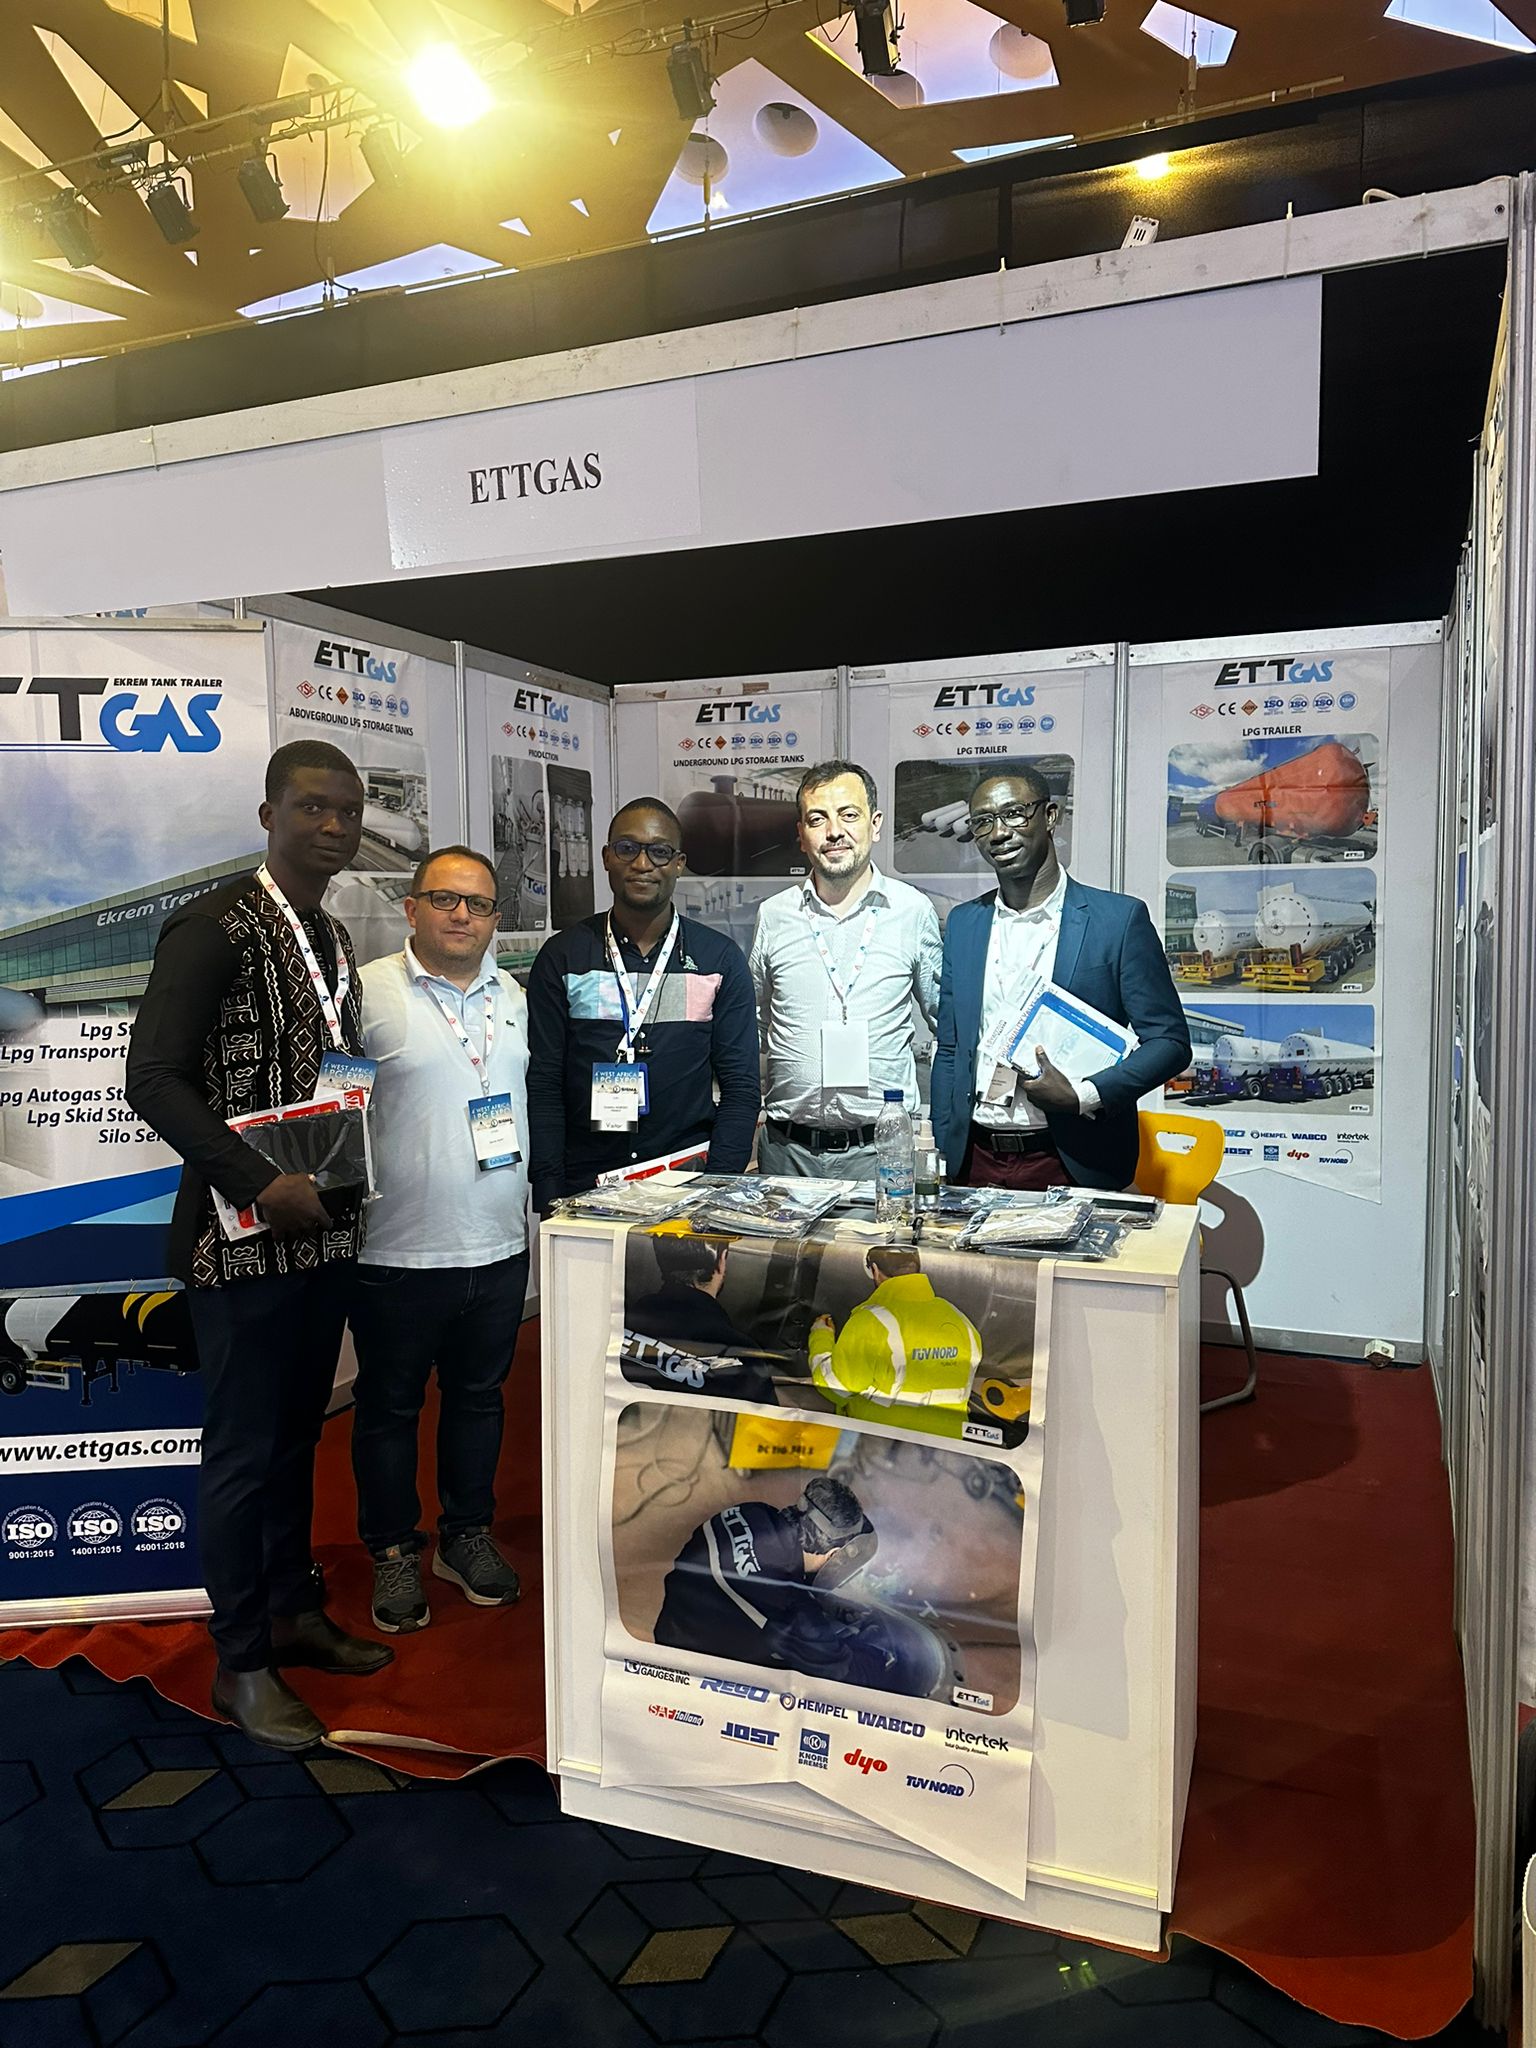 We participated in the 4th West Africa LPG Expo - Cote D'ivoire 7-8 September. We would like to thank all our customers and guests who visit our stand.